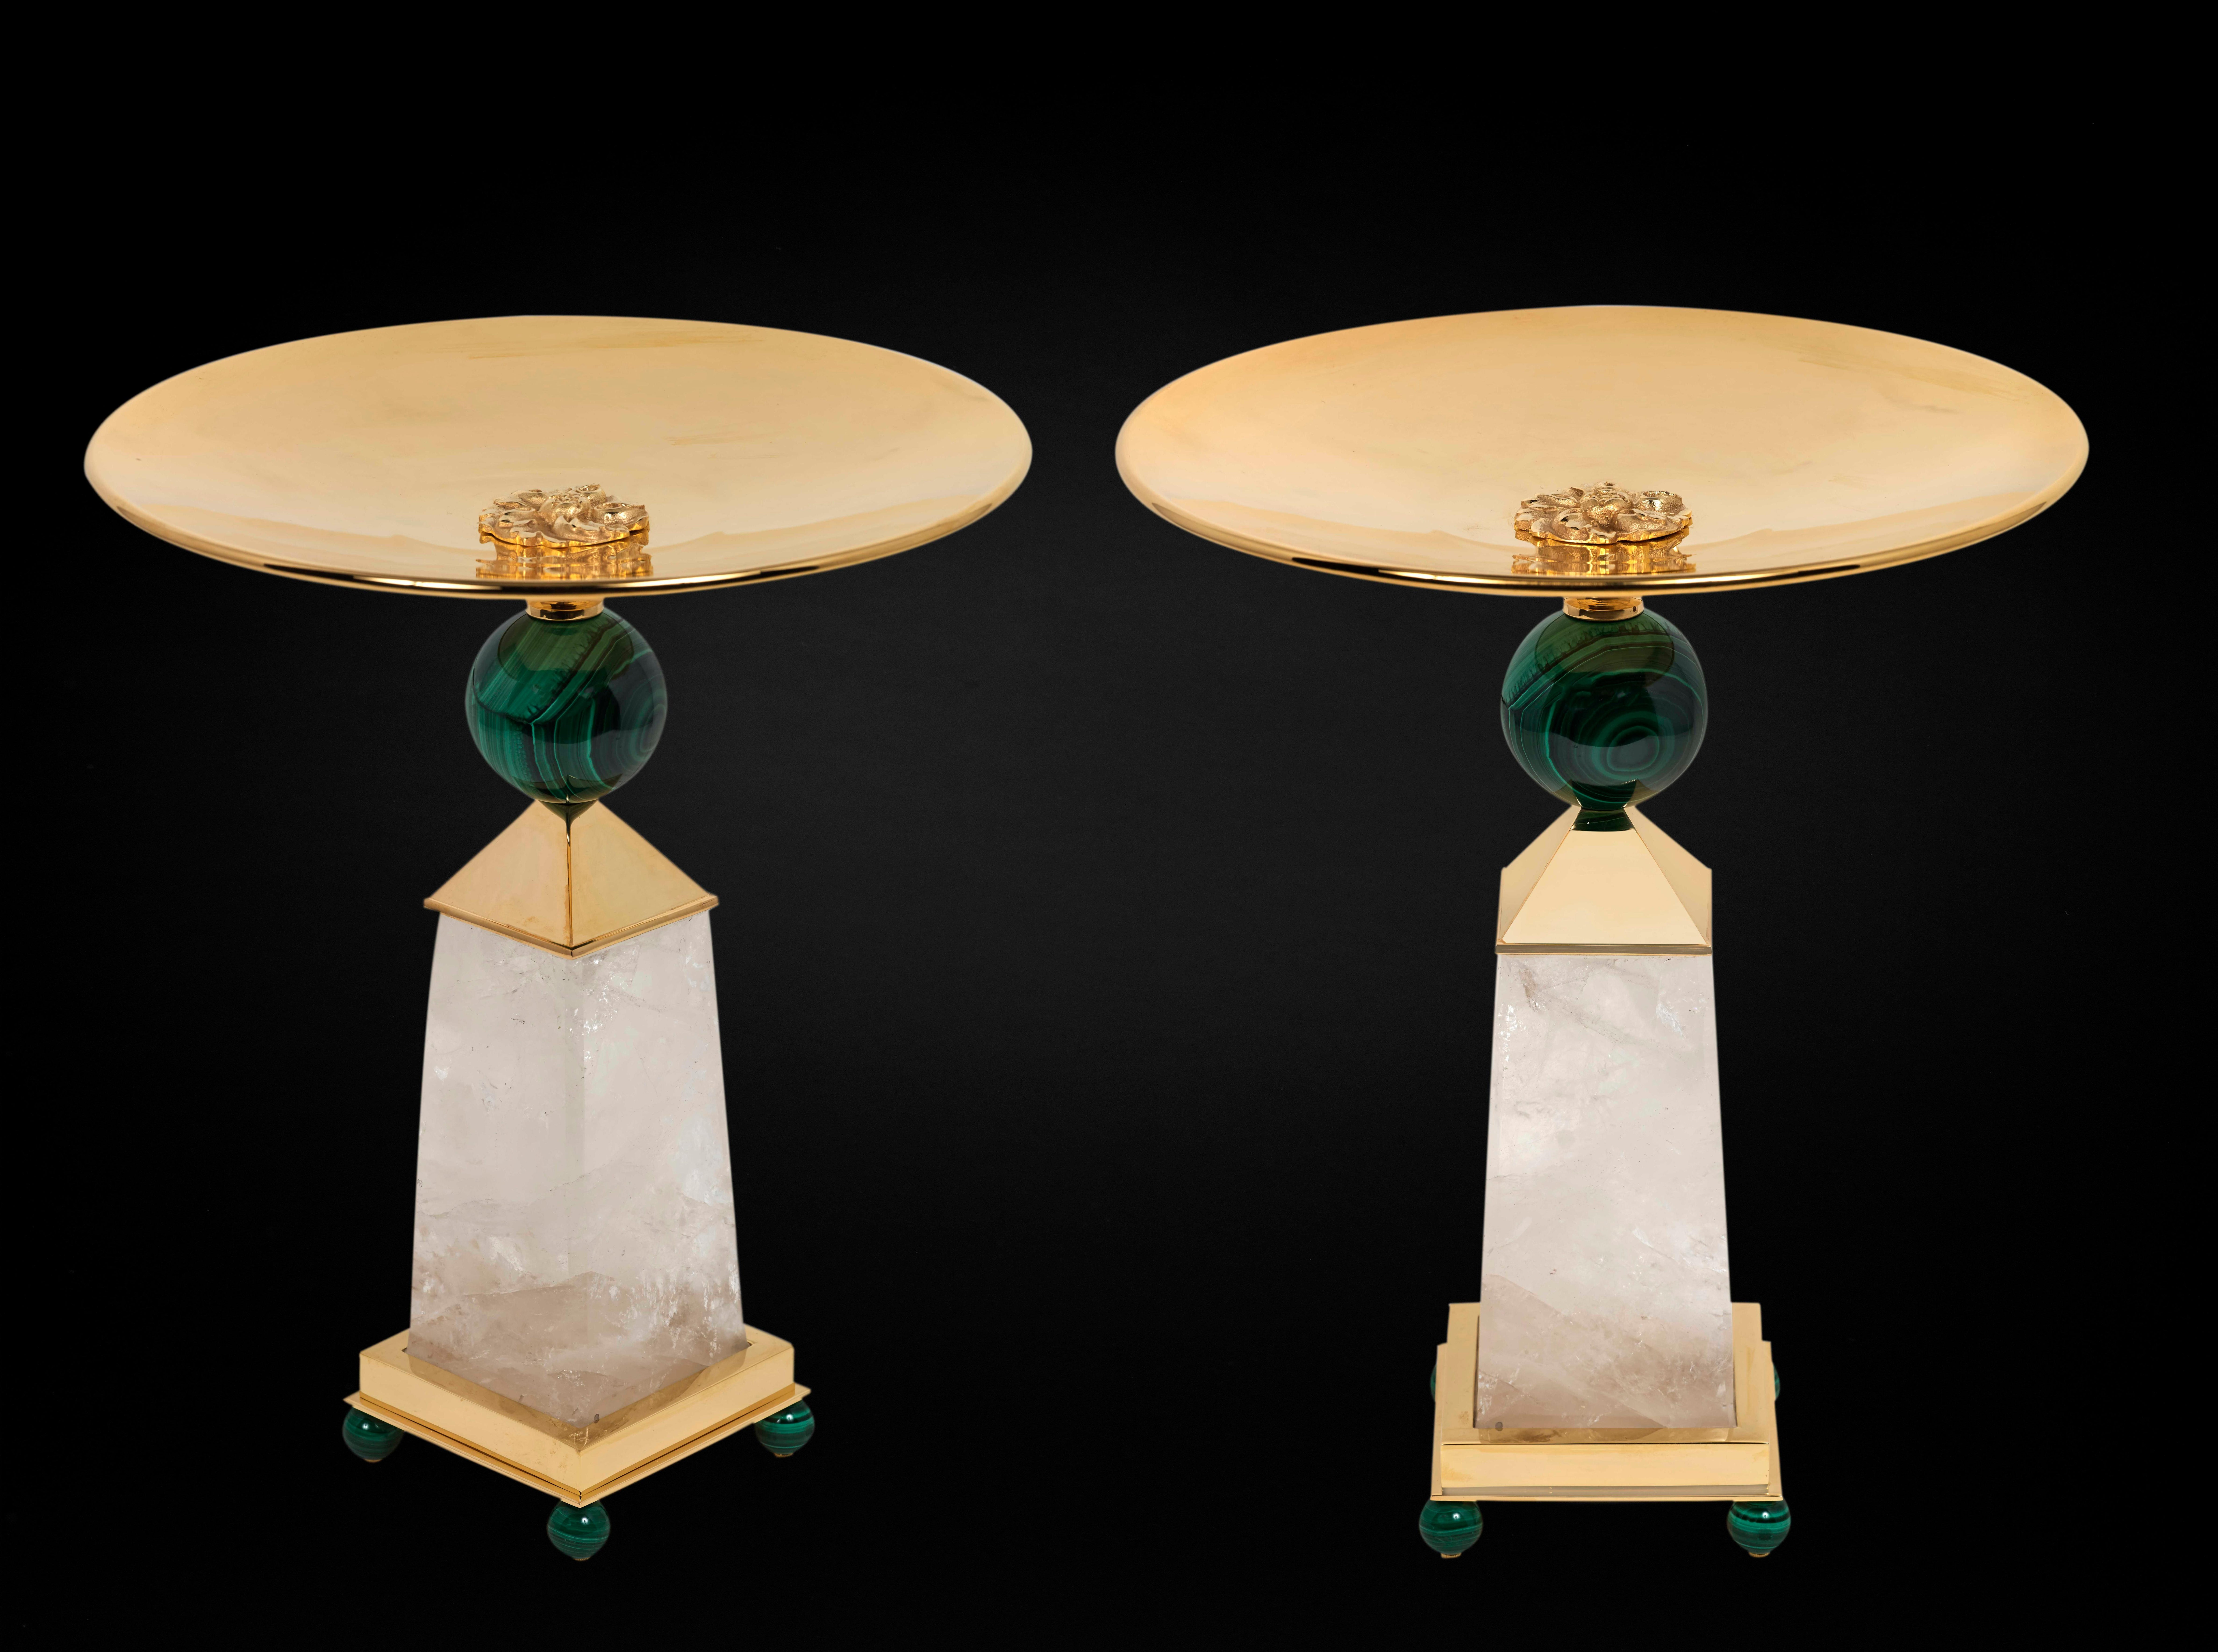 Exclusive and unique pair of rock crystal and malachite pair of bowls.
24 k gold plated brass.
Made in Paris by the best workers.
Alexandre Vossion design.